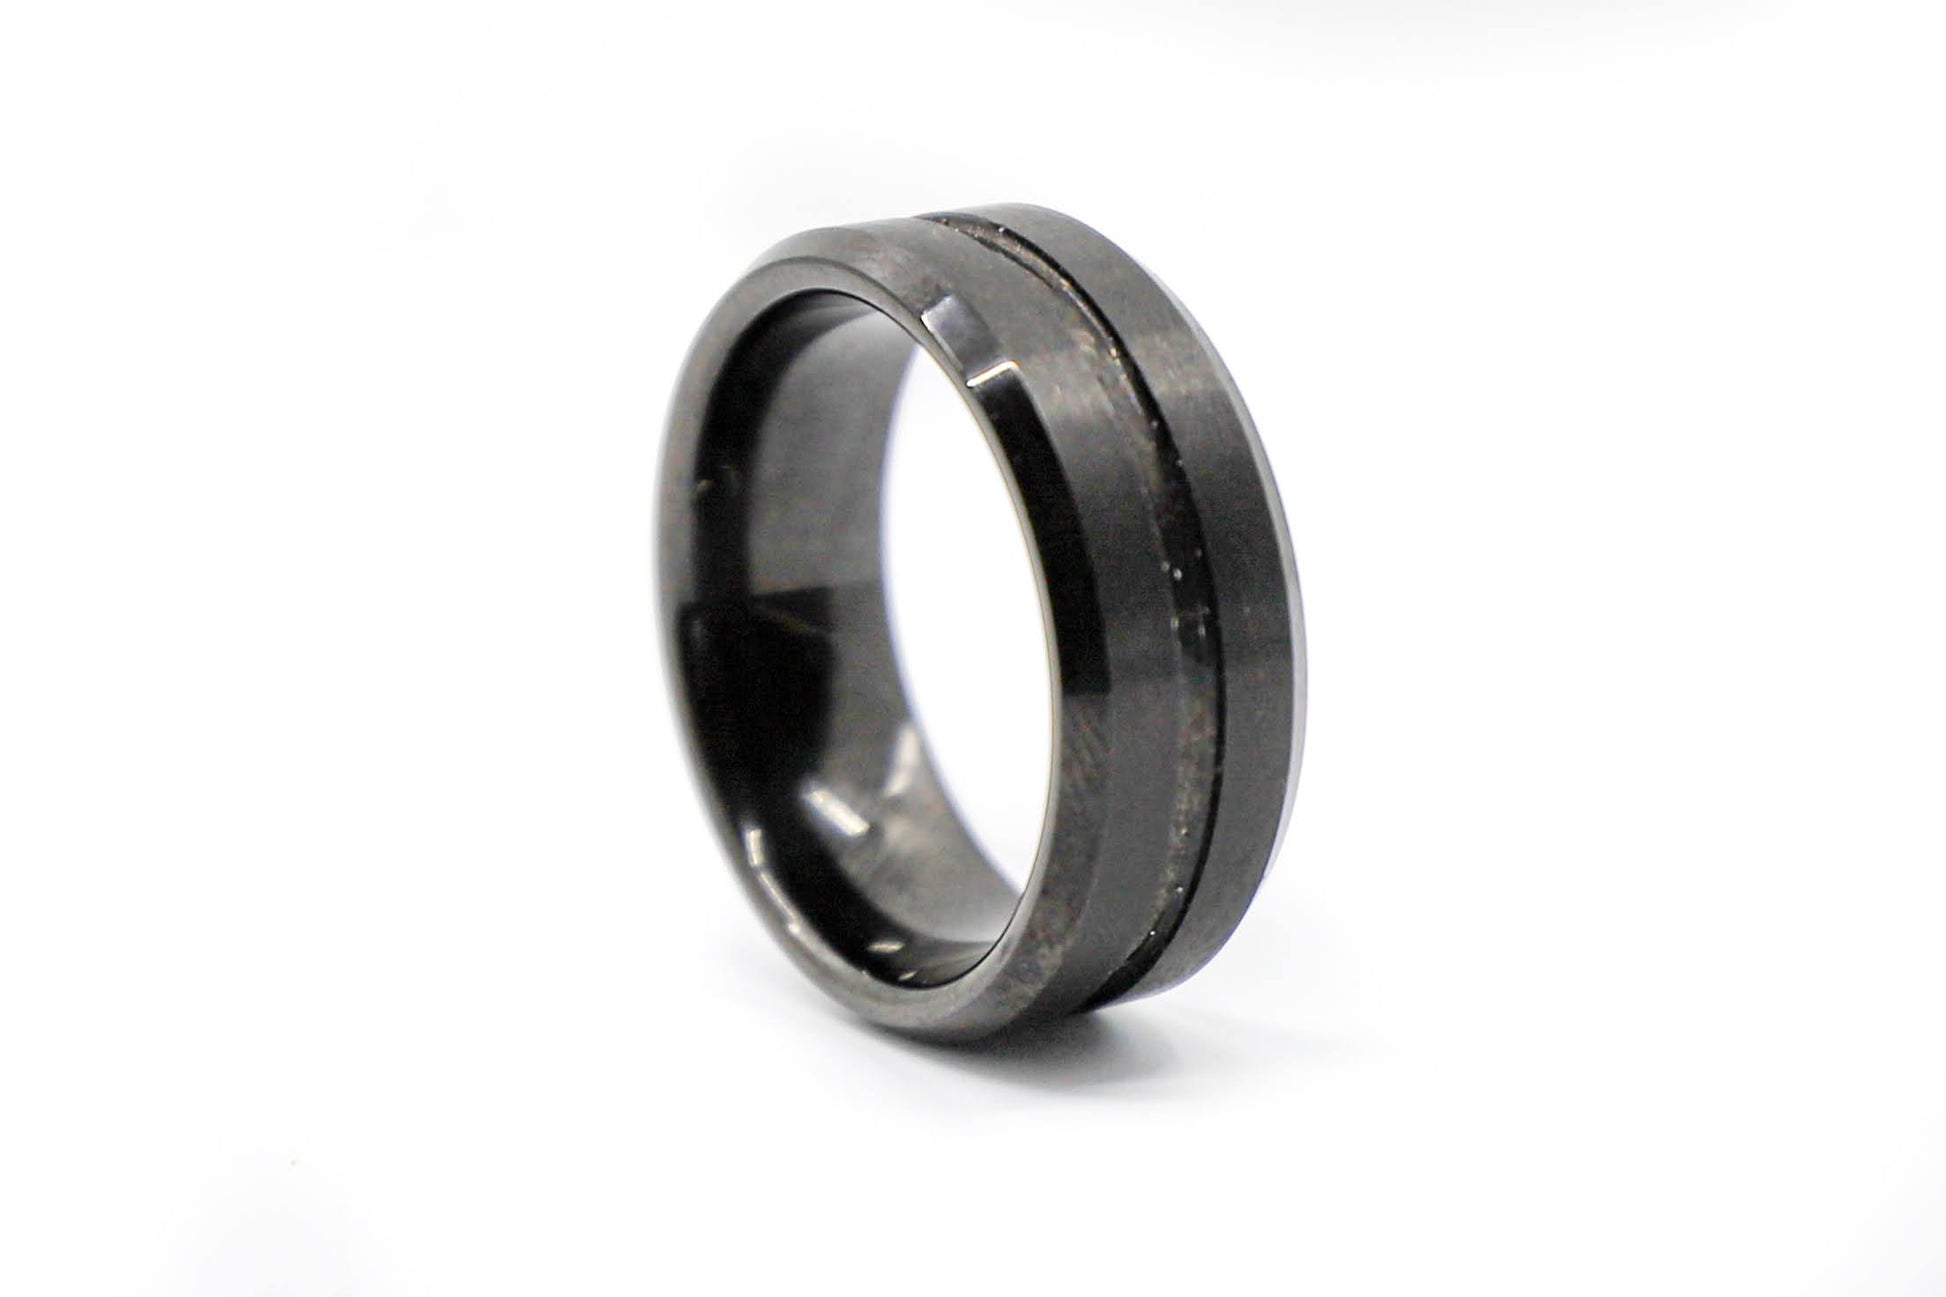 solid black wedding ring with embossed stripe